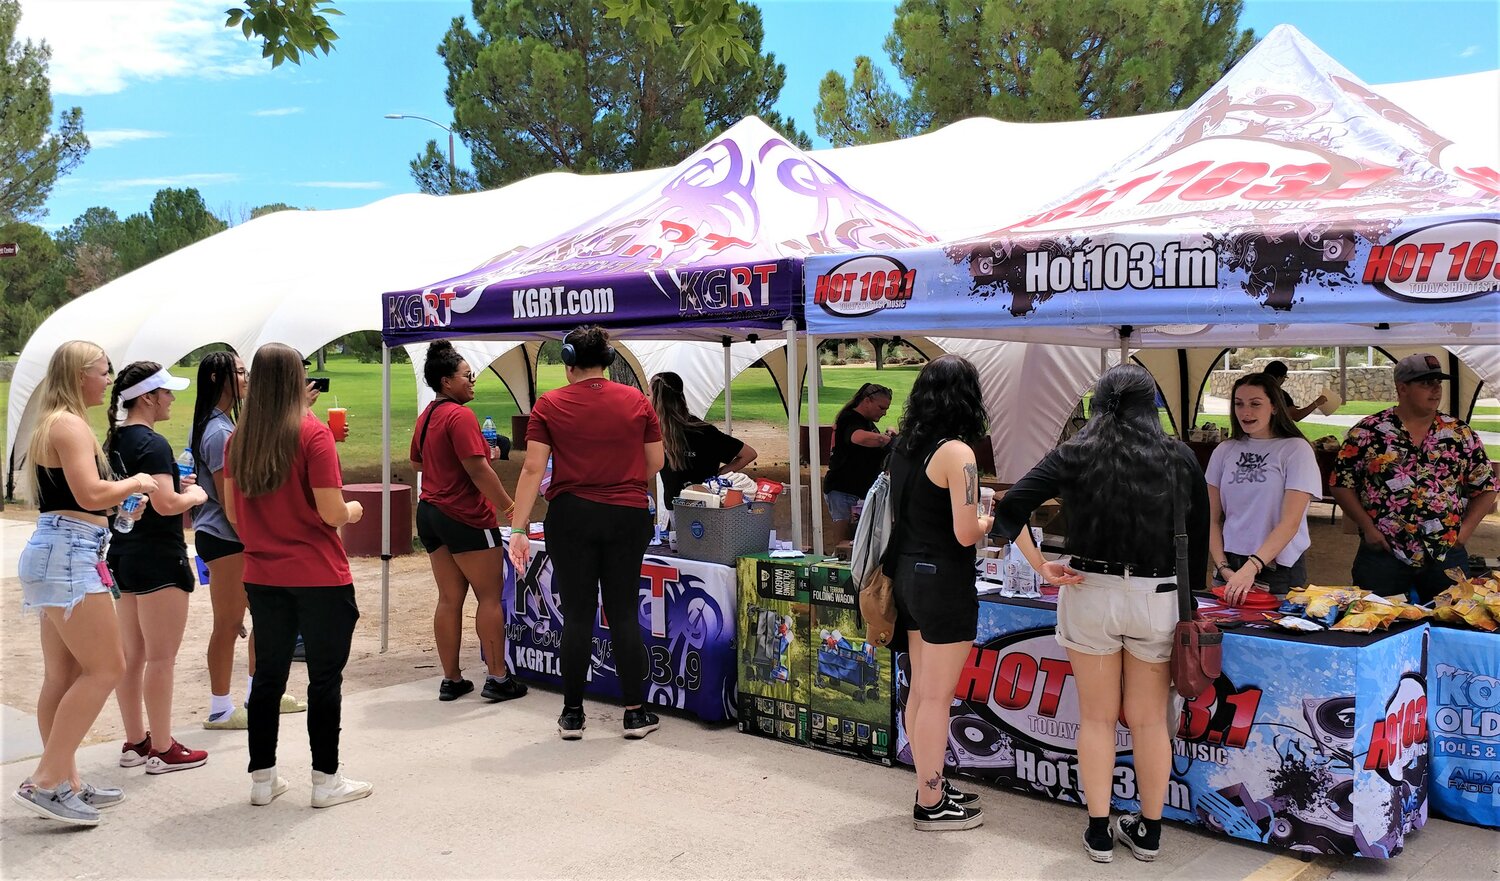 Students gathered information and goodies at the “Setting the Stage” Aggie welcome event Aug. 12-13 at New Mexico State University.